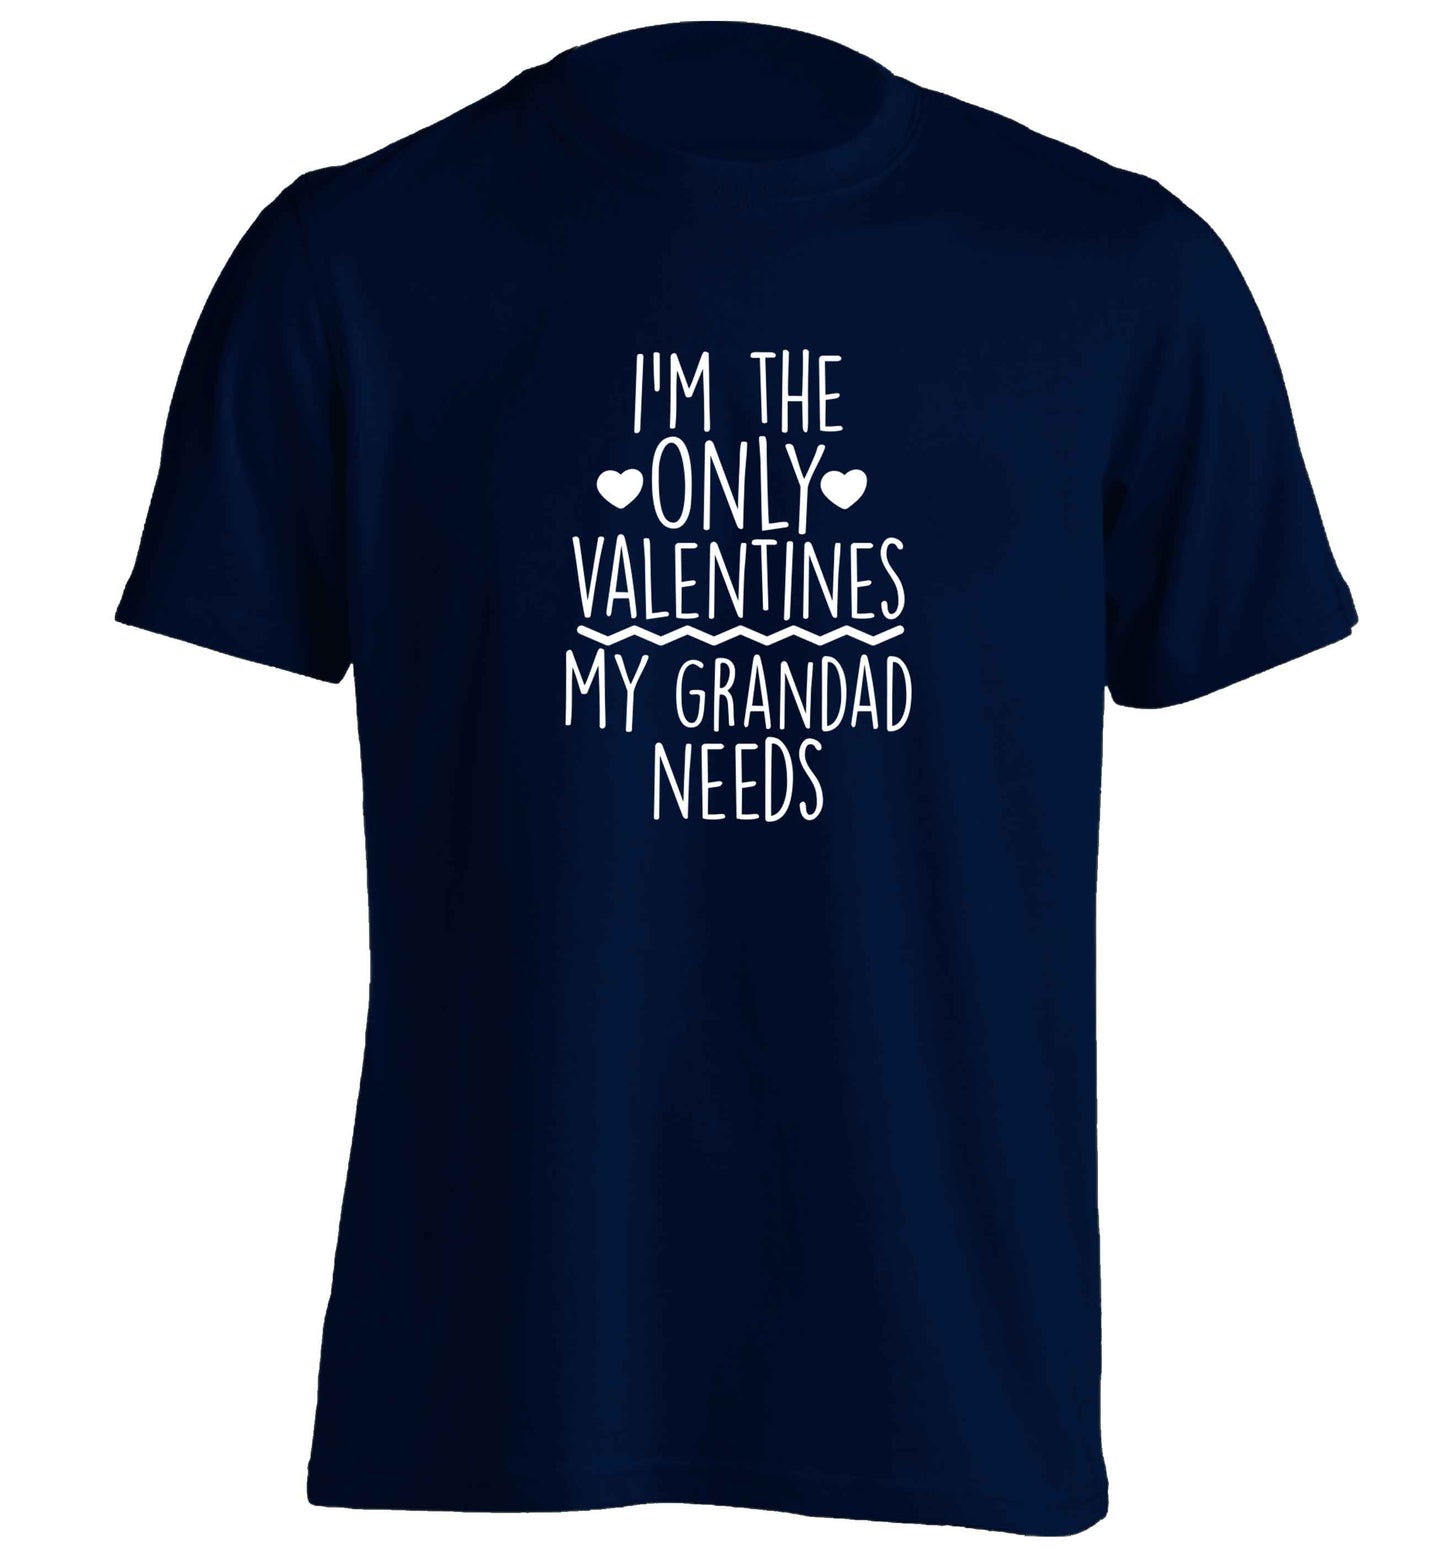 I'm the only valentines my grandad needs adults unisex navy Tshirt 2XL